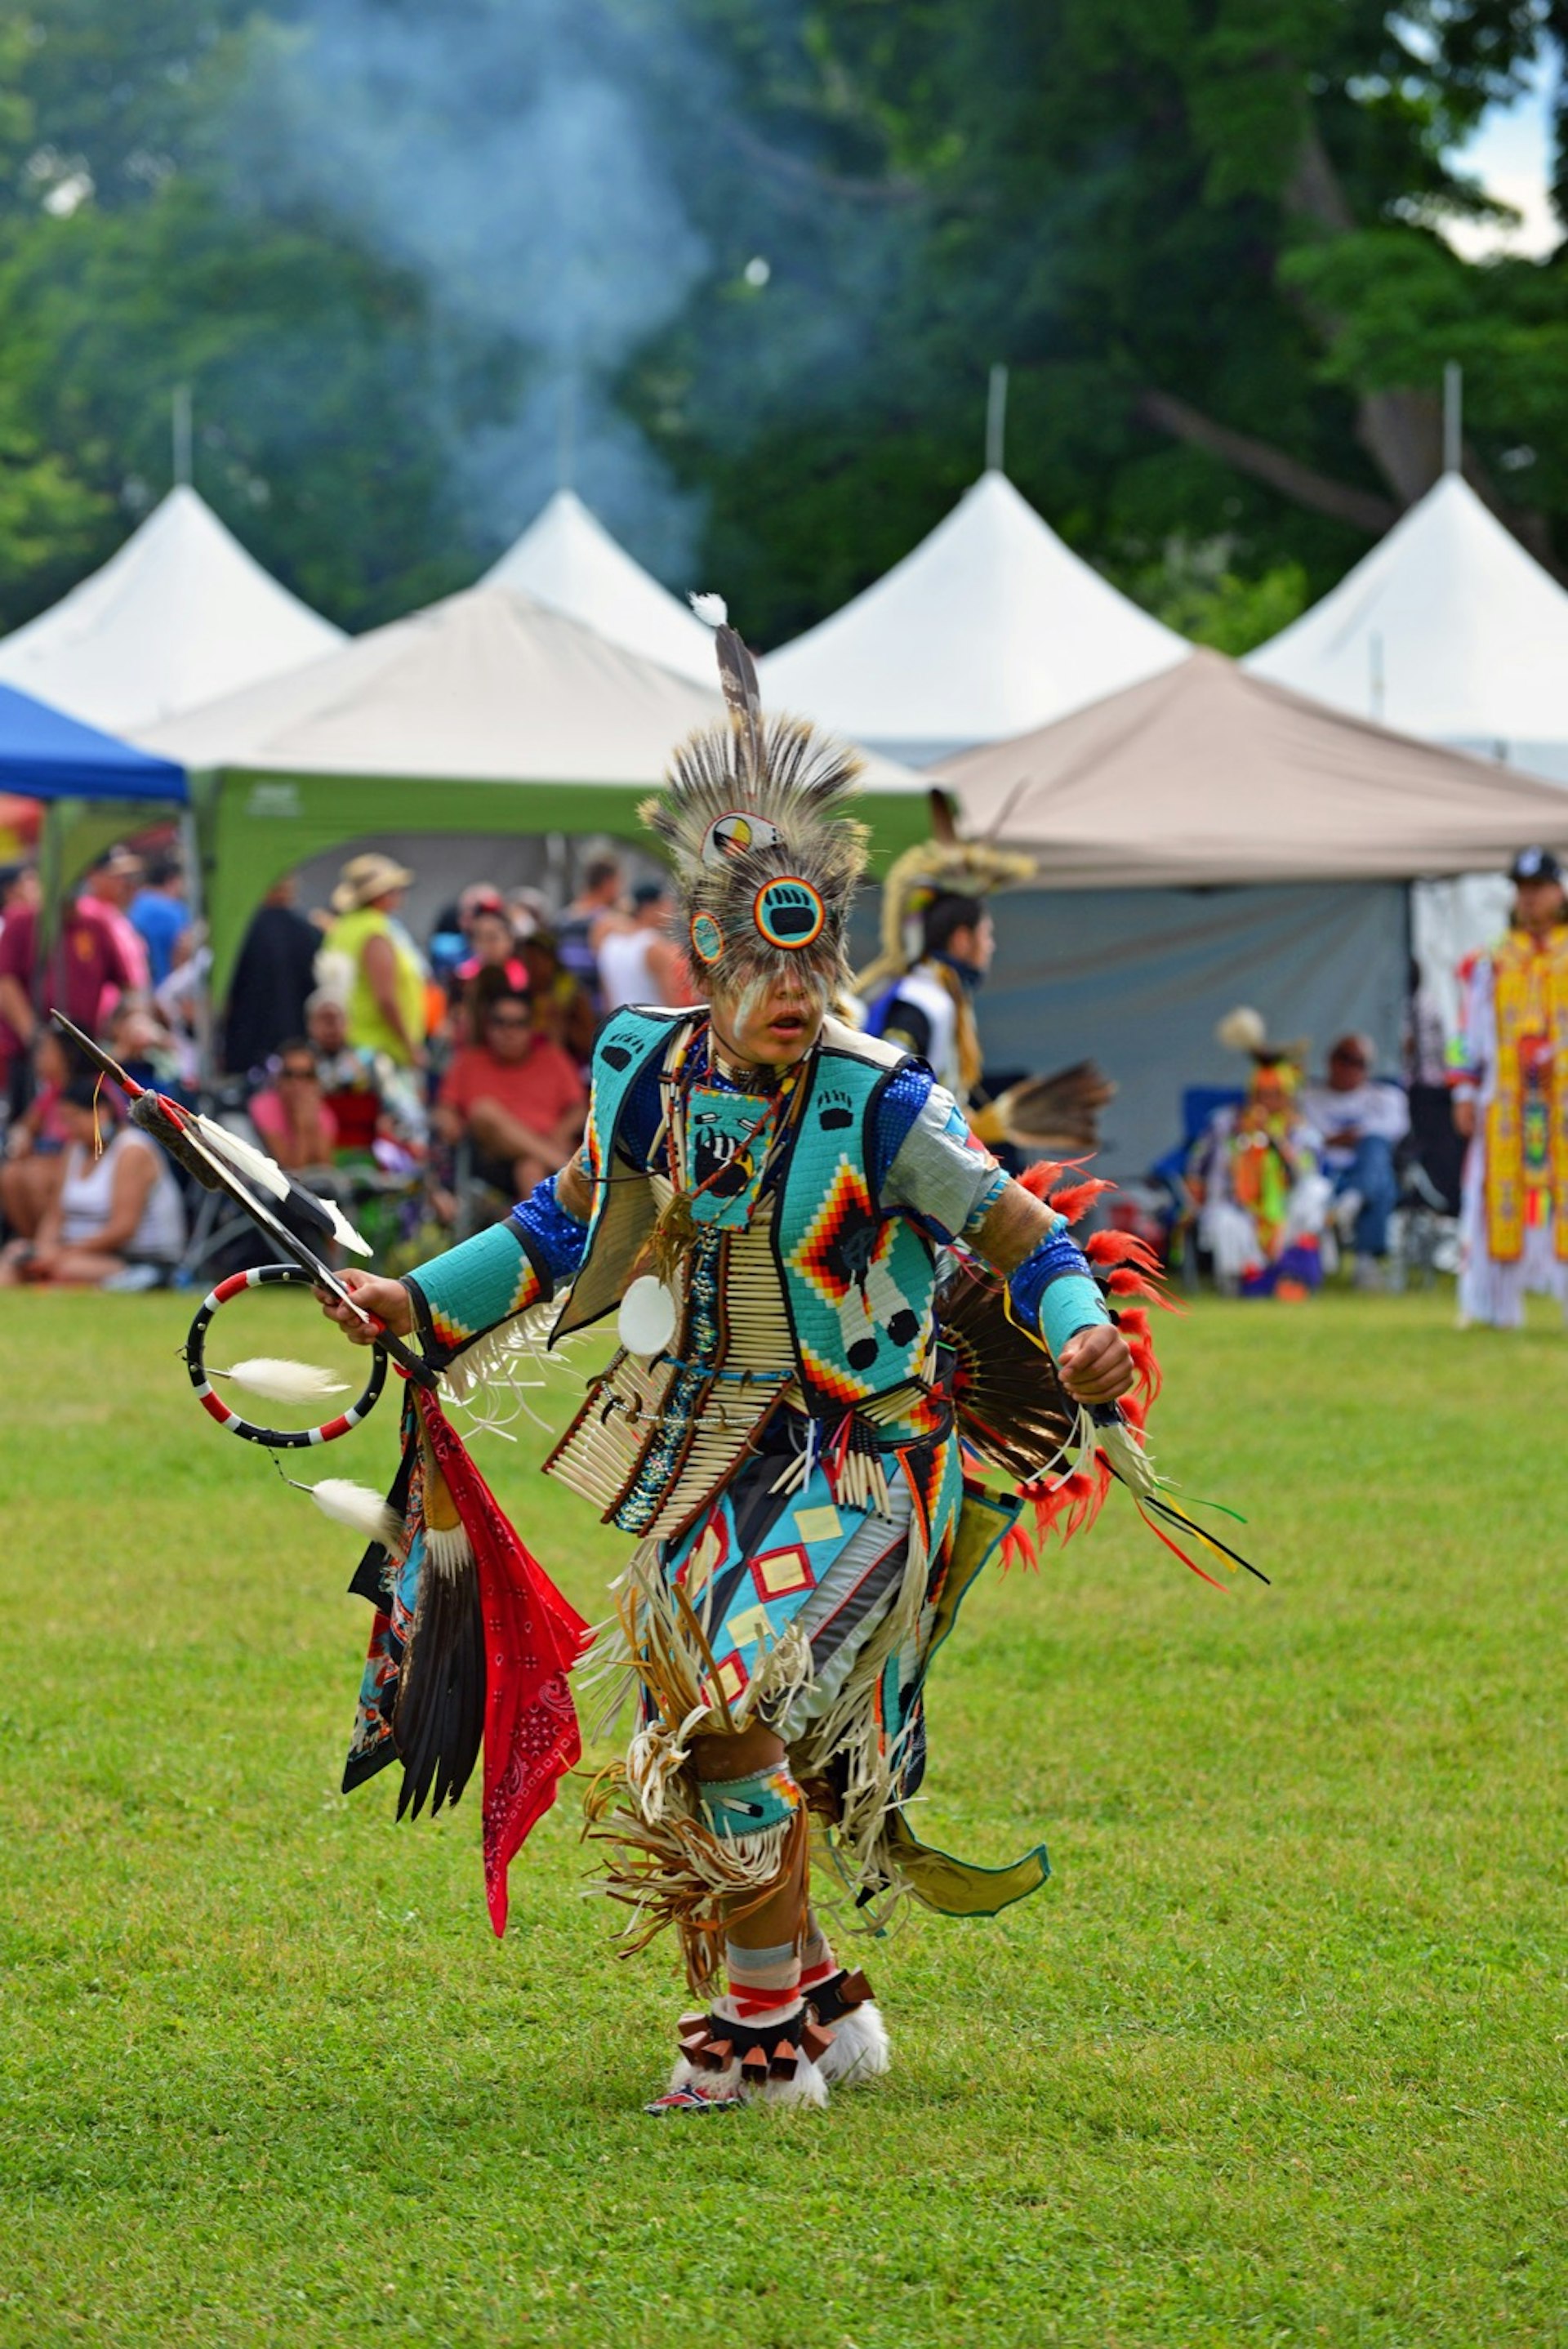 A teenage boy dressed in traditional clothing with colorful beads and feathers dances during the Summer Solstice Indigenous Arts Festival in Ottawa. 